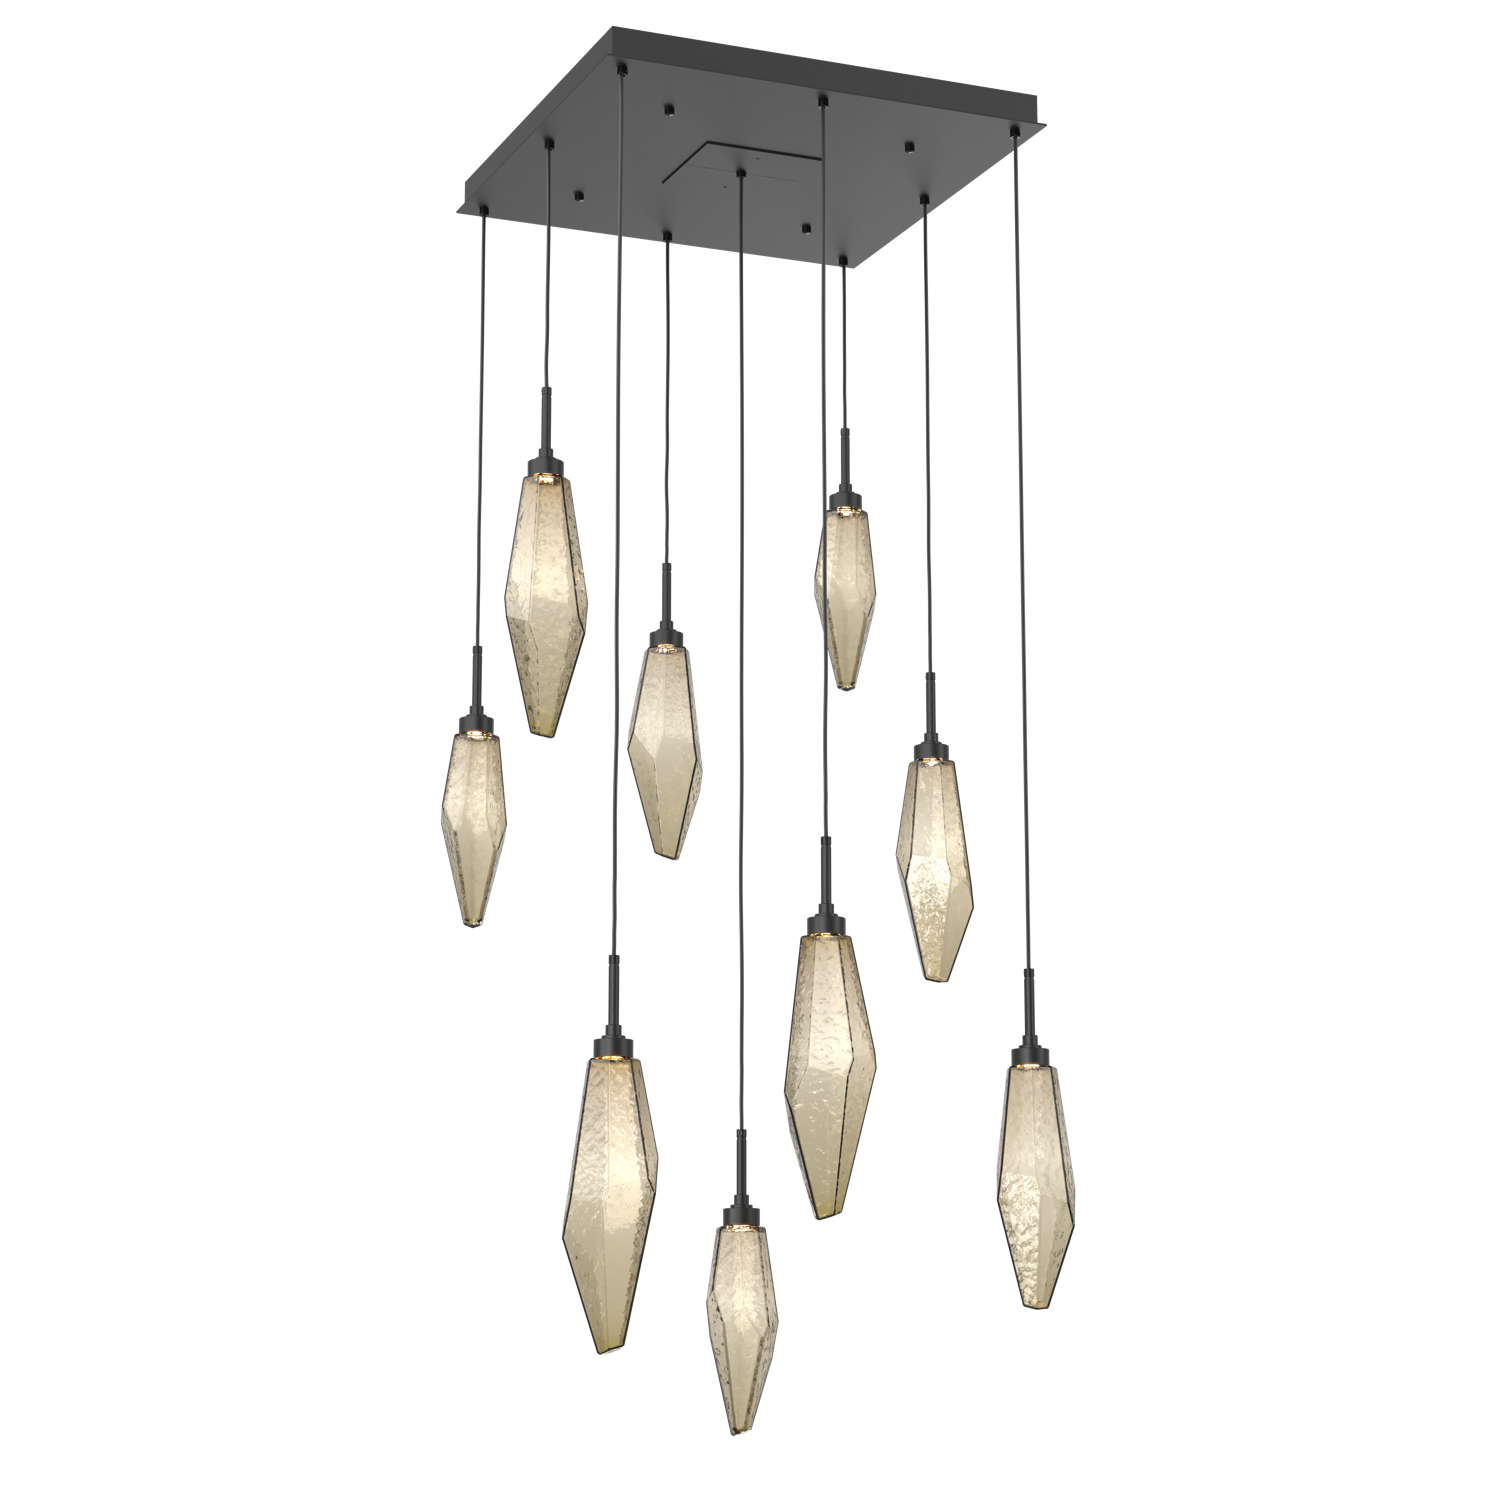 CHB0050-09-MB-CB-Hammerton-Studio-Rock-Crystal-9-light-square-pendant-chandelier-with-matte-black-finish-and-chilled-bronze-blown-glass-shades-and-LED-lamping